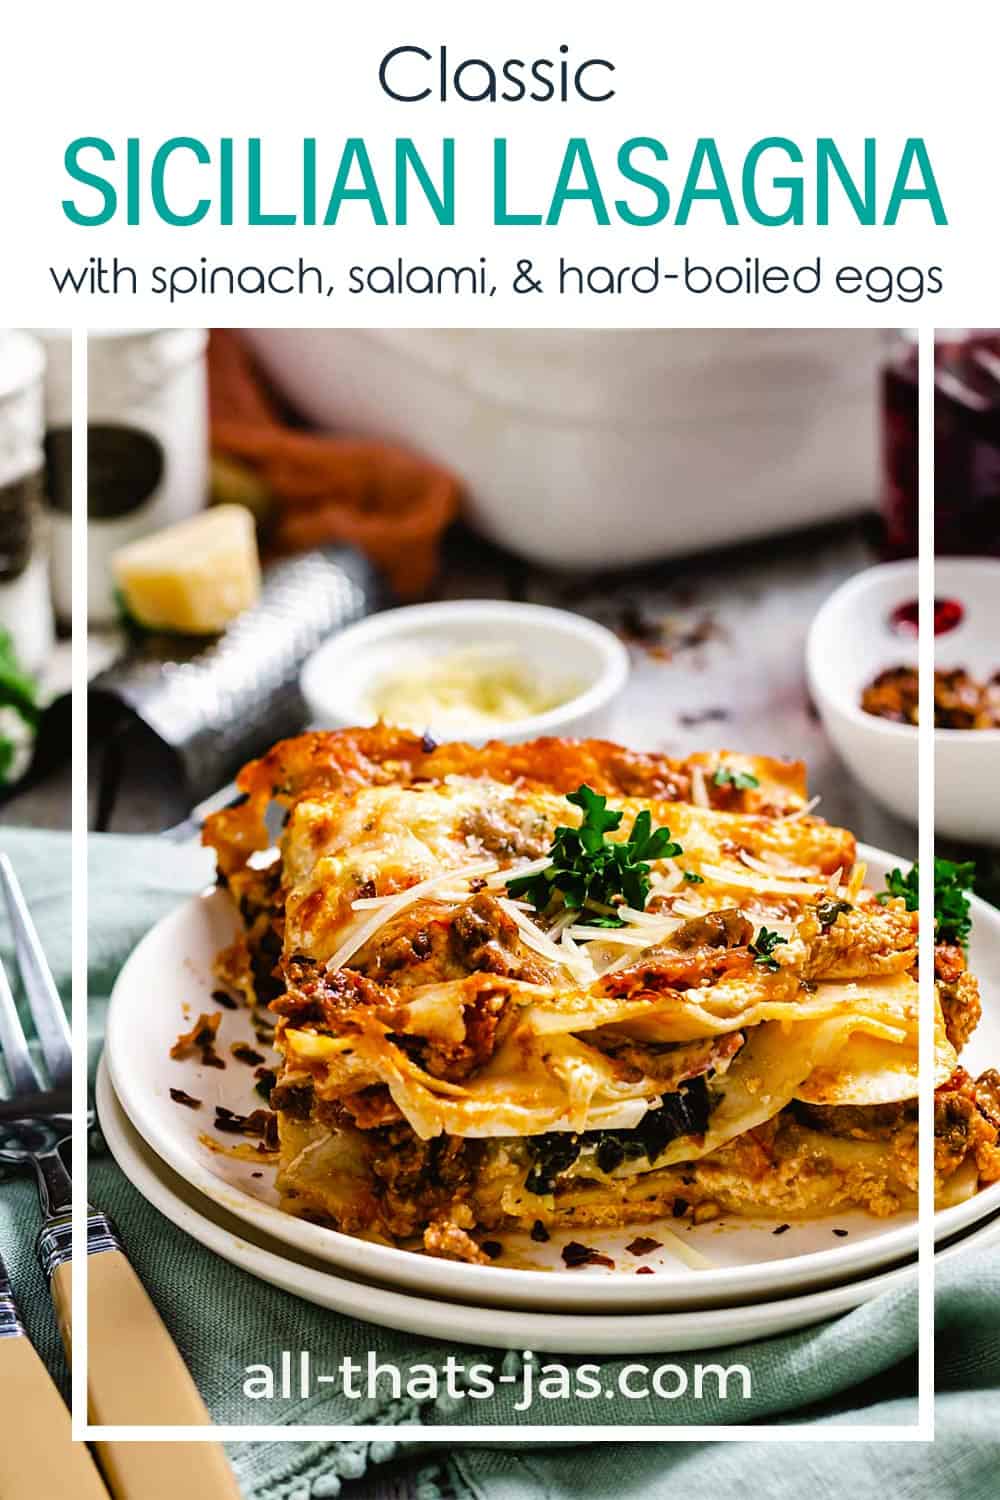 A slice of Sicilian lasagna on a plate with text overlay.